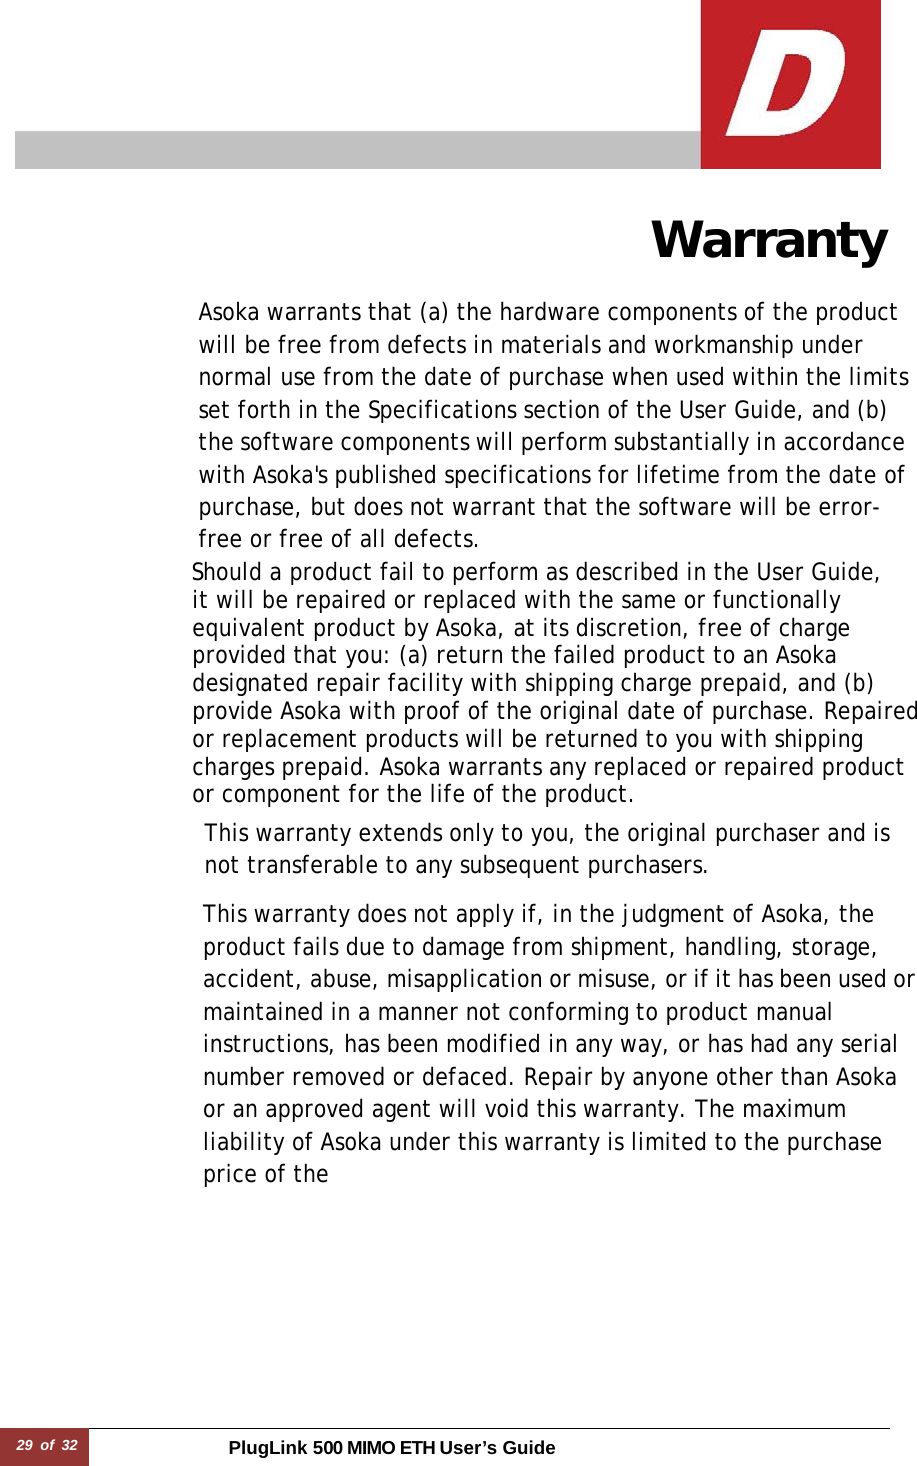 29 of 32 PlugLink 500 MIMO ETH User’s Guide     Warranty  Asoka warrants that (a) the hardware components of the product will be free from defects in materials and workmanship under normal use from the date of purchase when used within the limits set forth in the Specifications section of the User Guide, and (b) the software components will perform substantially in accordance with Asoka&apos;s published specifications for lifetime from the date of purchase, but does not warrant that the software will be error-free or free of all defects. Should a product fail to perform as described in the User Guide,  it will be repaired or replaced with the same or functionally equivalent product by Asoka, at its discretion, free of charge provided that you: (a) return the failed product to an Asoka designated repair facility with shipping charge prepaid, and (b) provide Asoka with proof of the original date of purchase. Repaired or replacement products will be returned to you with shipping charges prepaid. Asoka warrants any replaced or repaired product or component for the life of the product.  This warranty extends only to you, the original purchaser and is not transferable to any subsequent purchasers.  This warranty does not apply if, in the judgment of Asoka, the product fails due to damage from shipment, handling, storage, accident, abuse, misapplication or misuse, or if it has been used or maintained in a manner not conforming to product manual instructions, has been modified in any way, or has had any serial number removed or defaced. Repair by anyone other than Asoka or an approved agent will void this warranty. The maximum liability of Asoka under this warranty is limited to the purchase price of the 